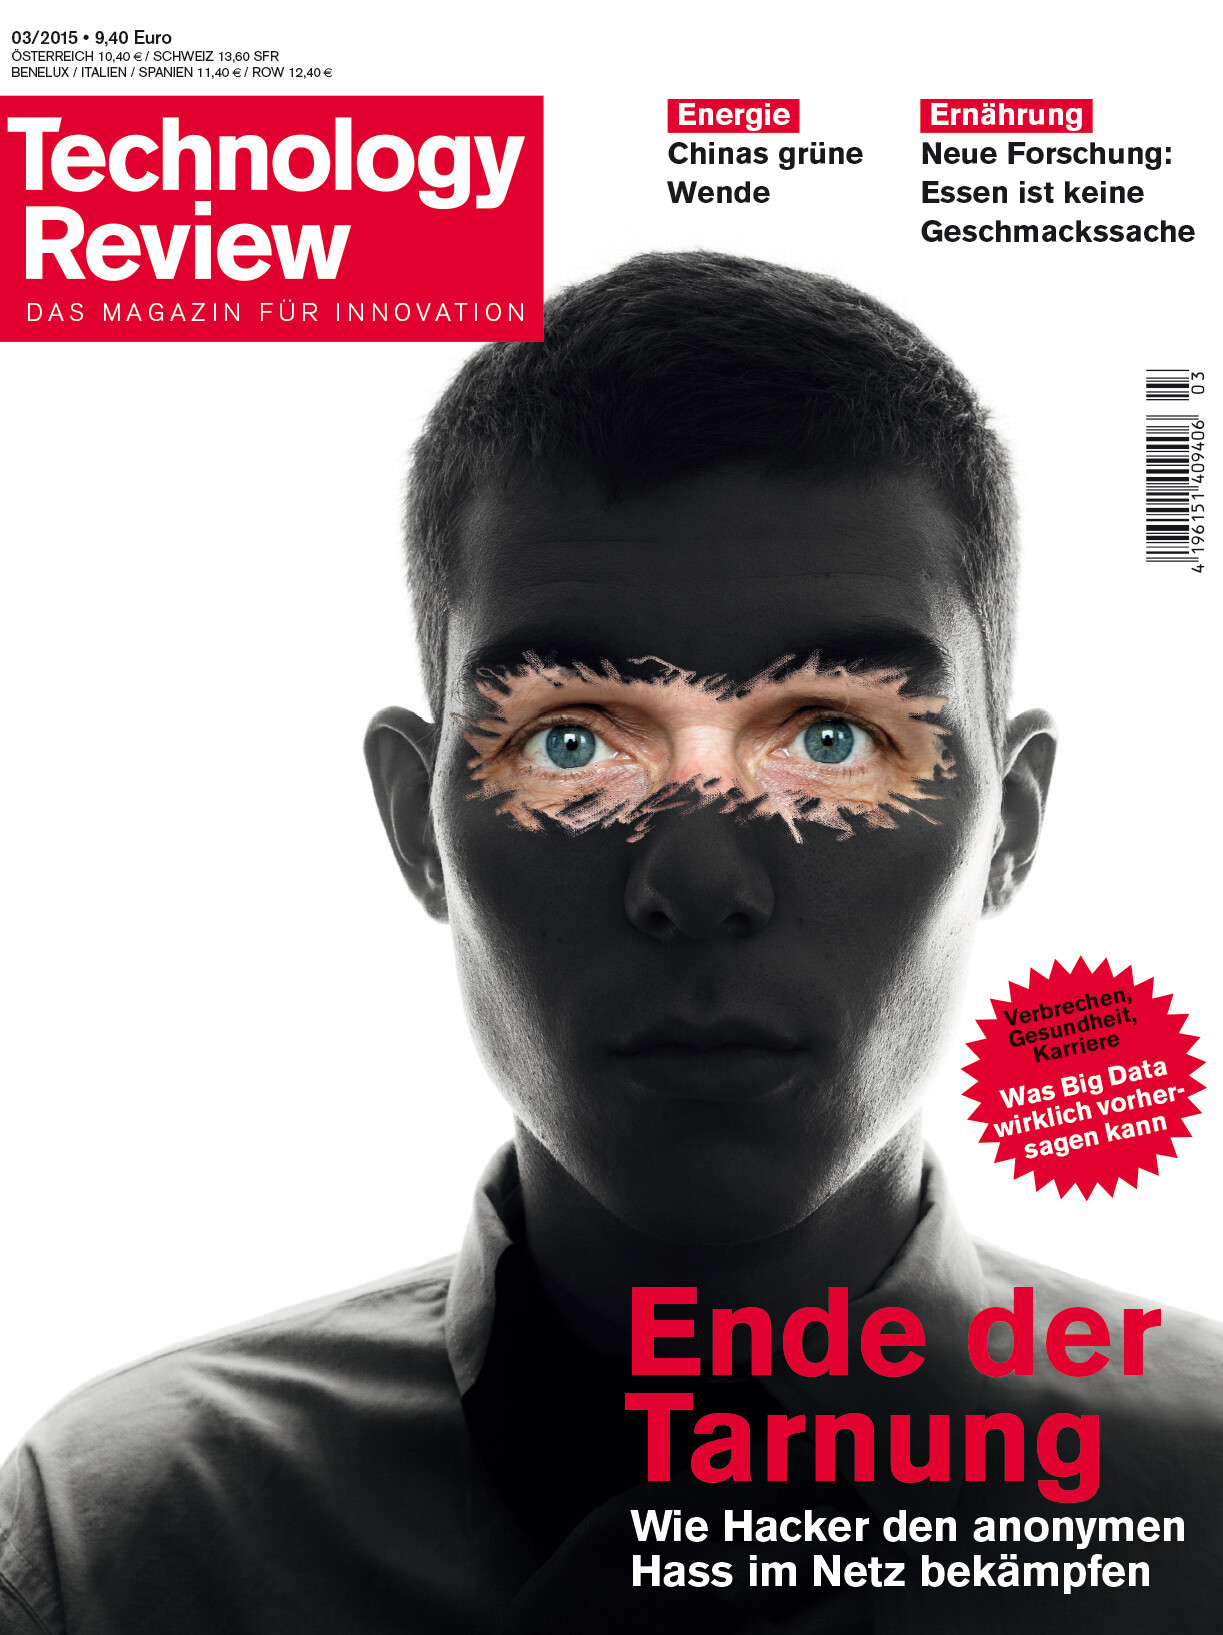 Technology Review 03/2015